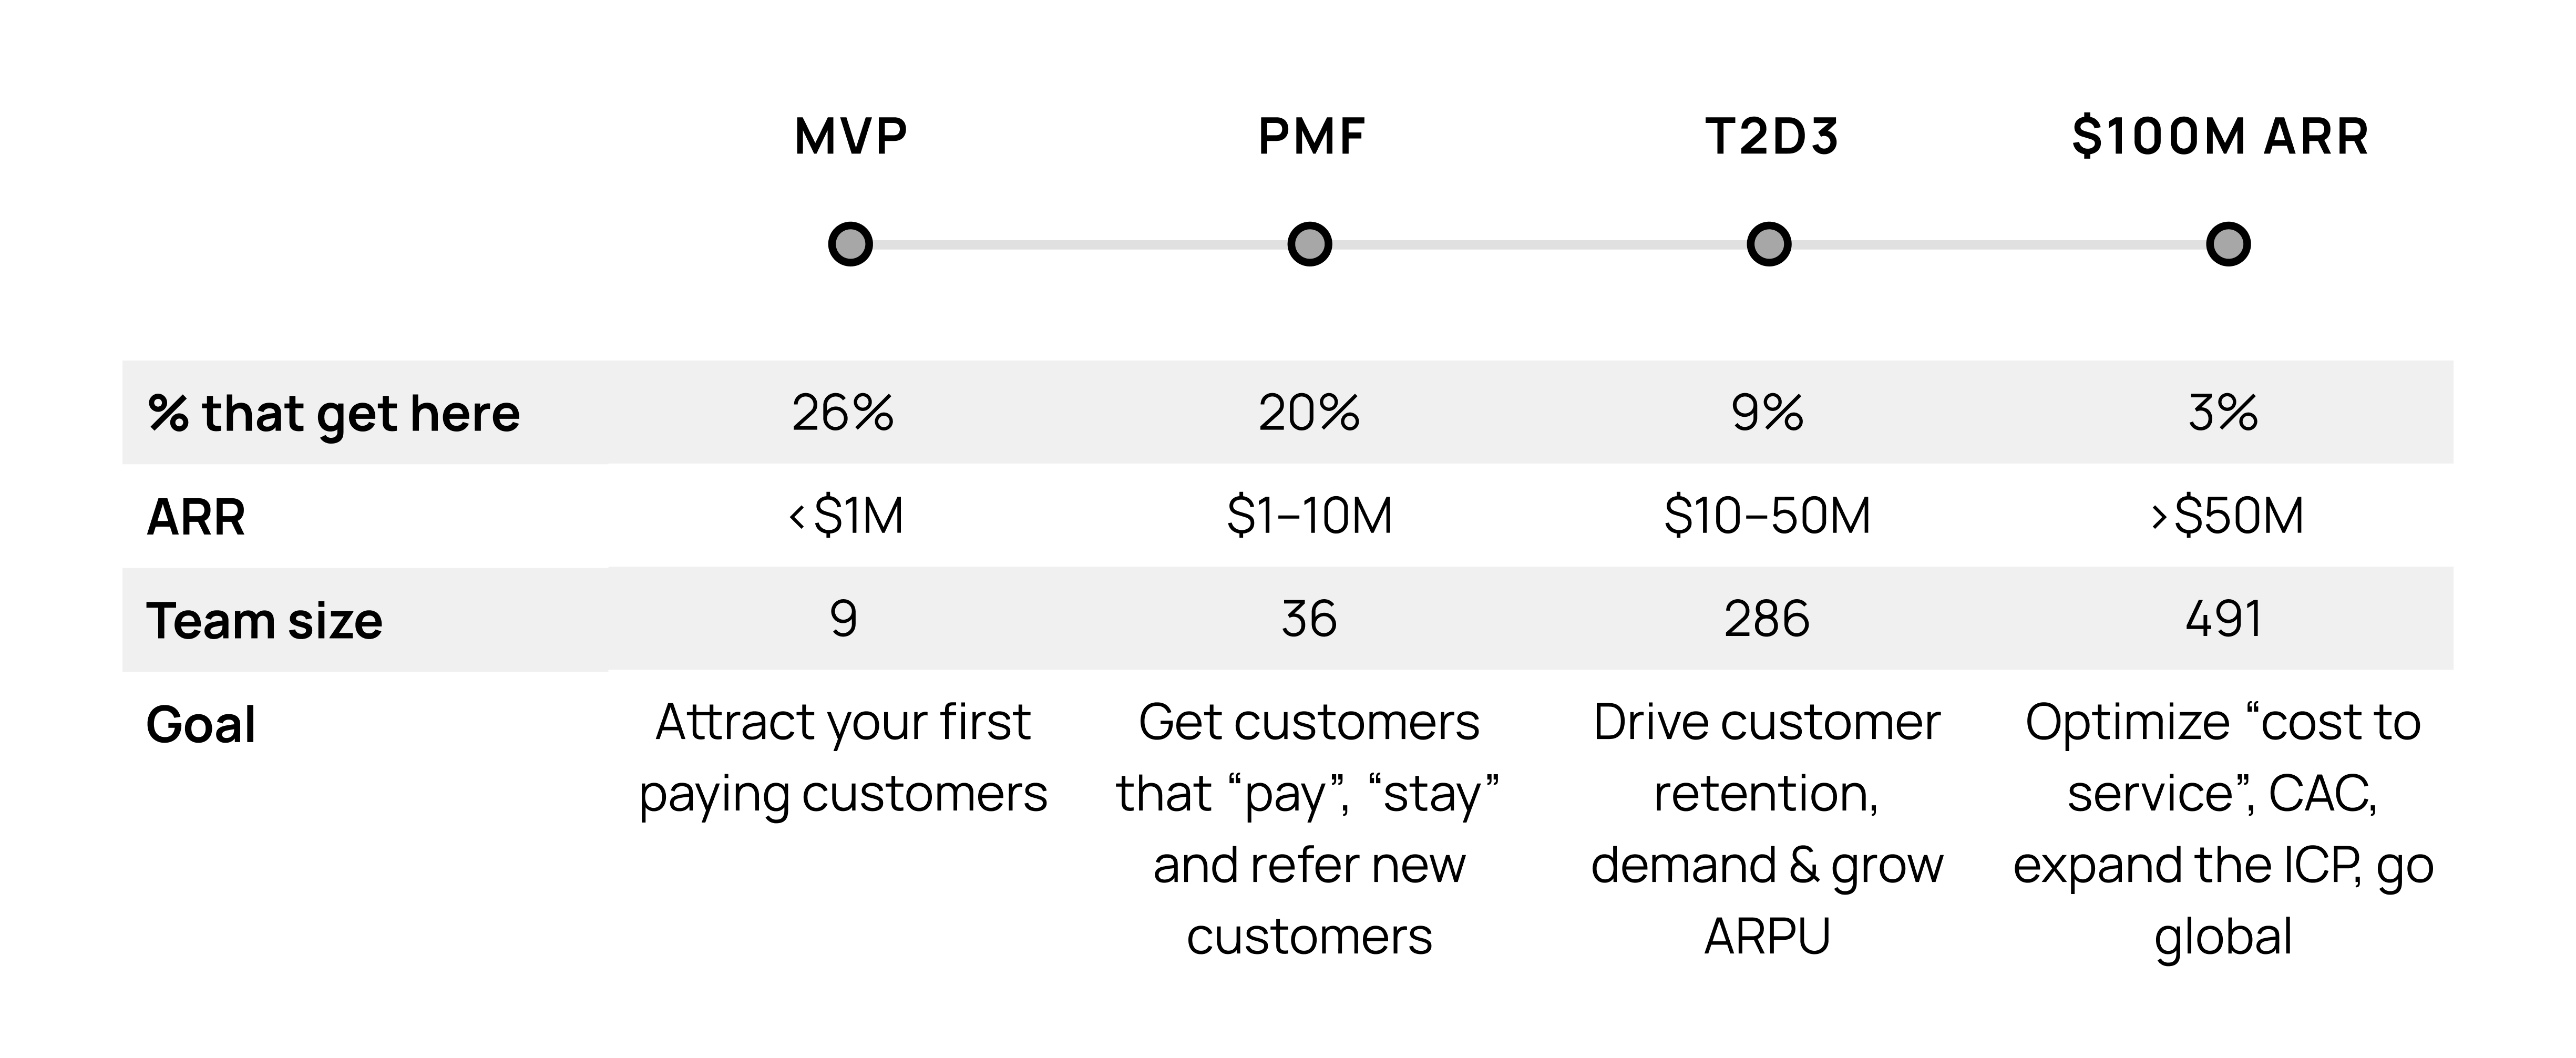 t2d3 b2b saas maturity stages showing MVP, PMF, T2D3 and $100M ARR